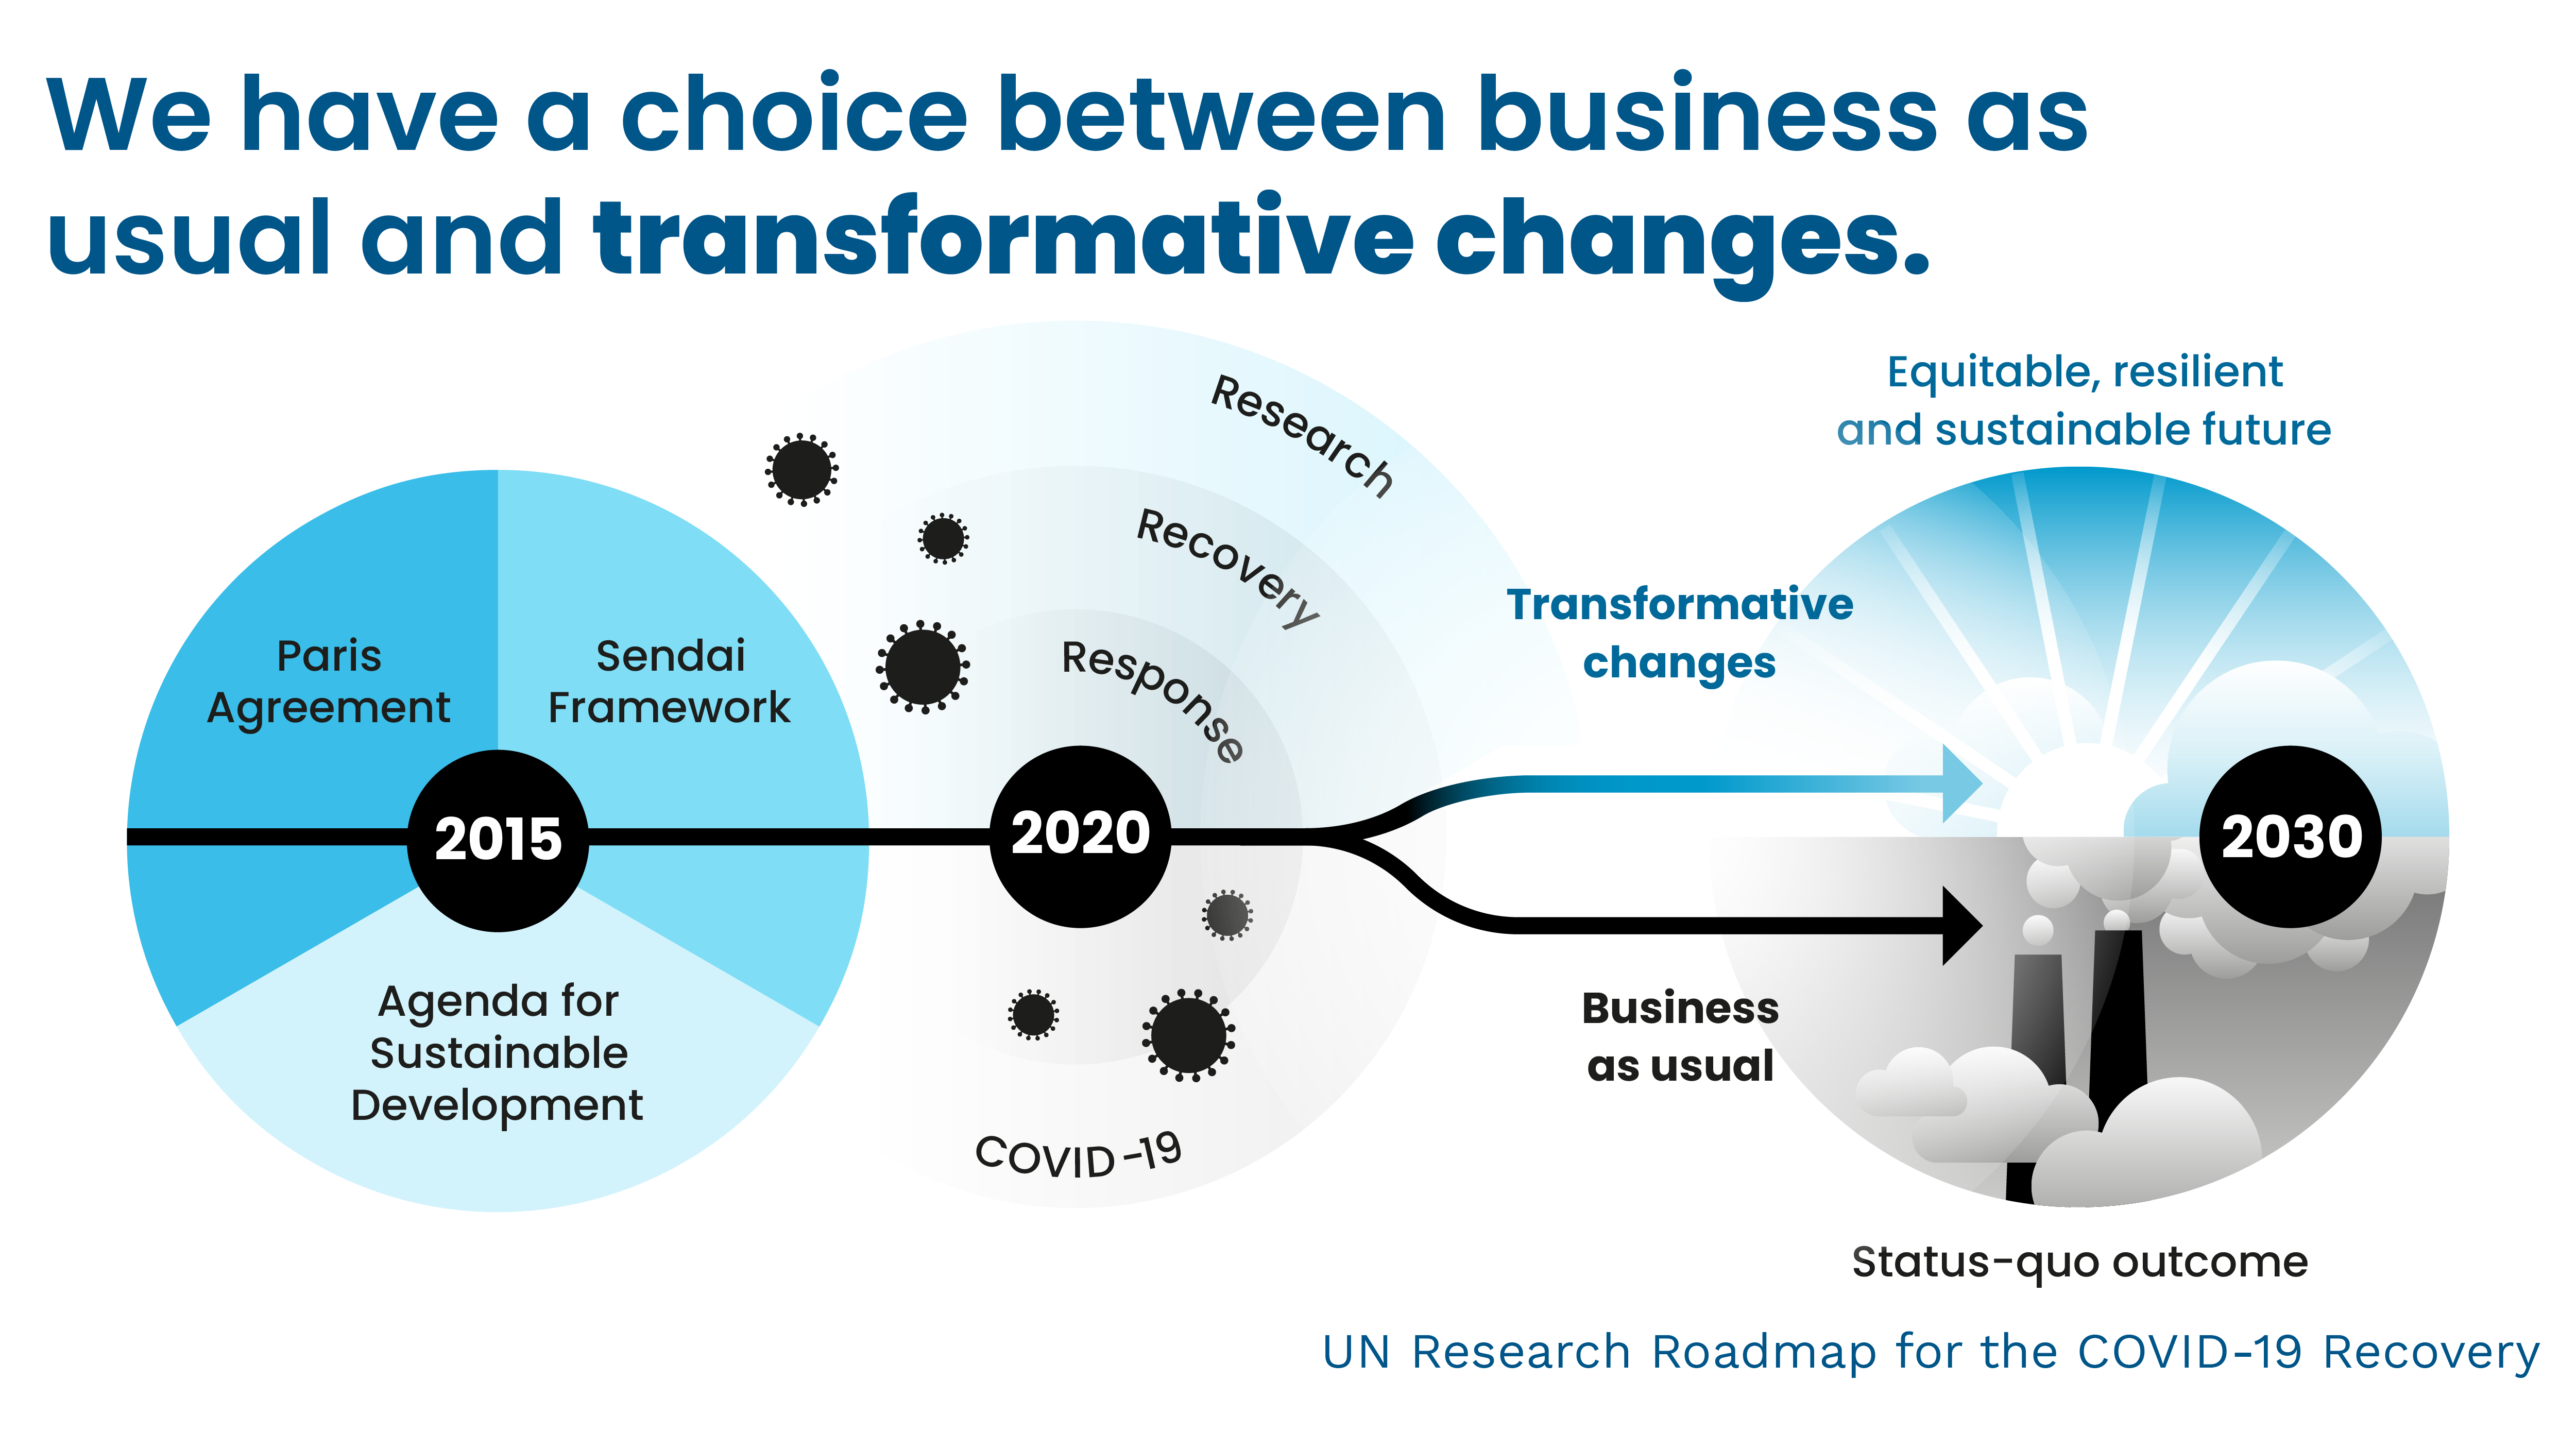 We have a choice between business as usual and transformative changes. UN Research Roadmap for the COVID-19 Recovery